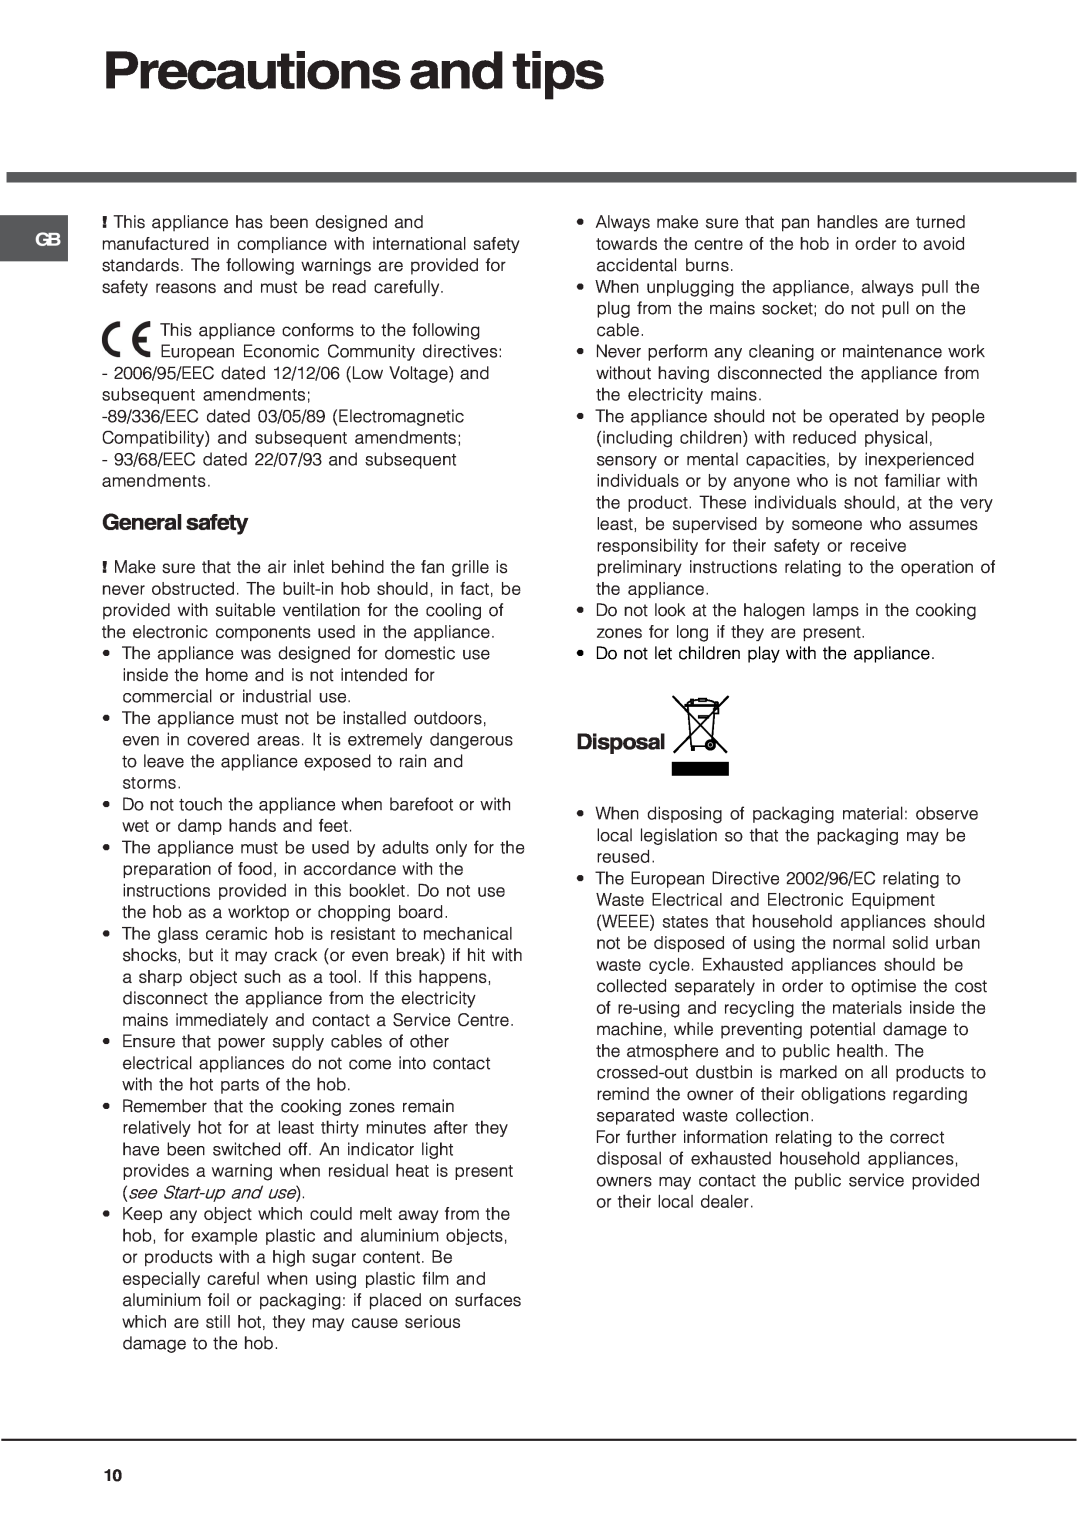 Hotpoint CRA 641 DC operating instructions Precautions and tips, General safety, Disposal 